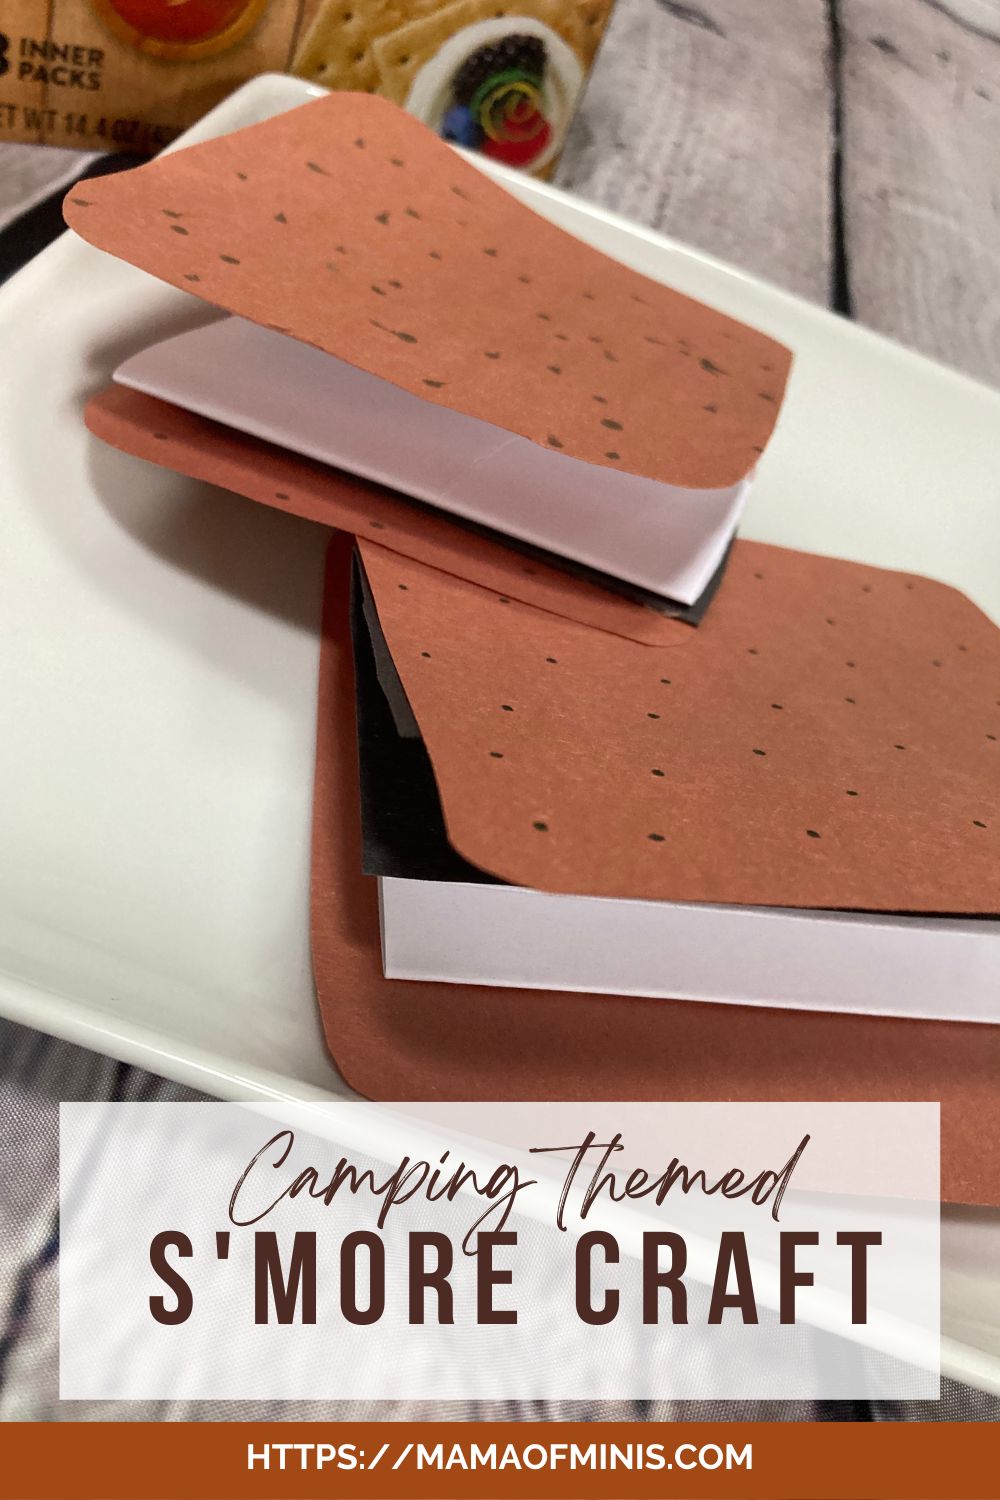 Camping themed smores craft